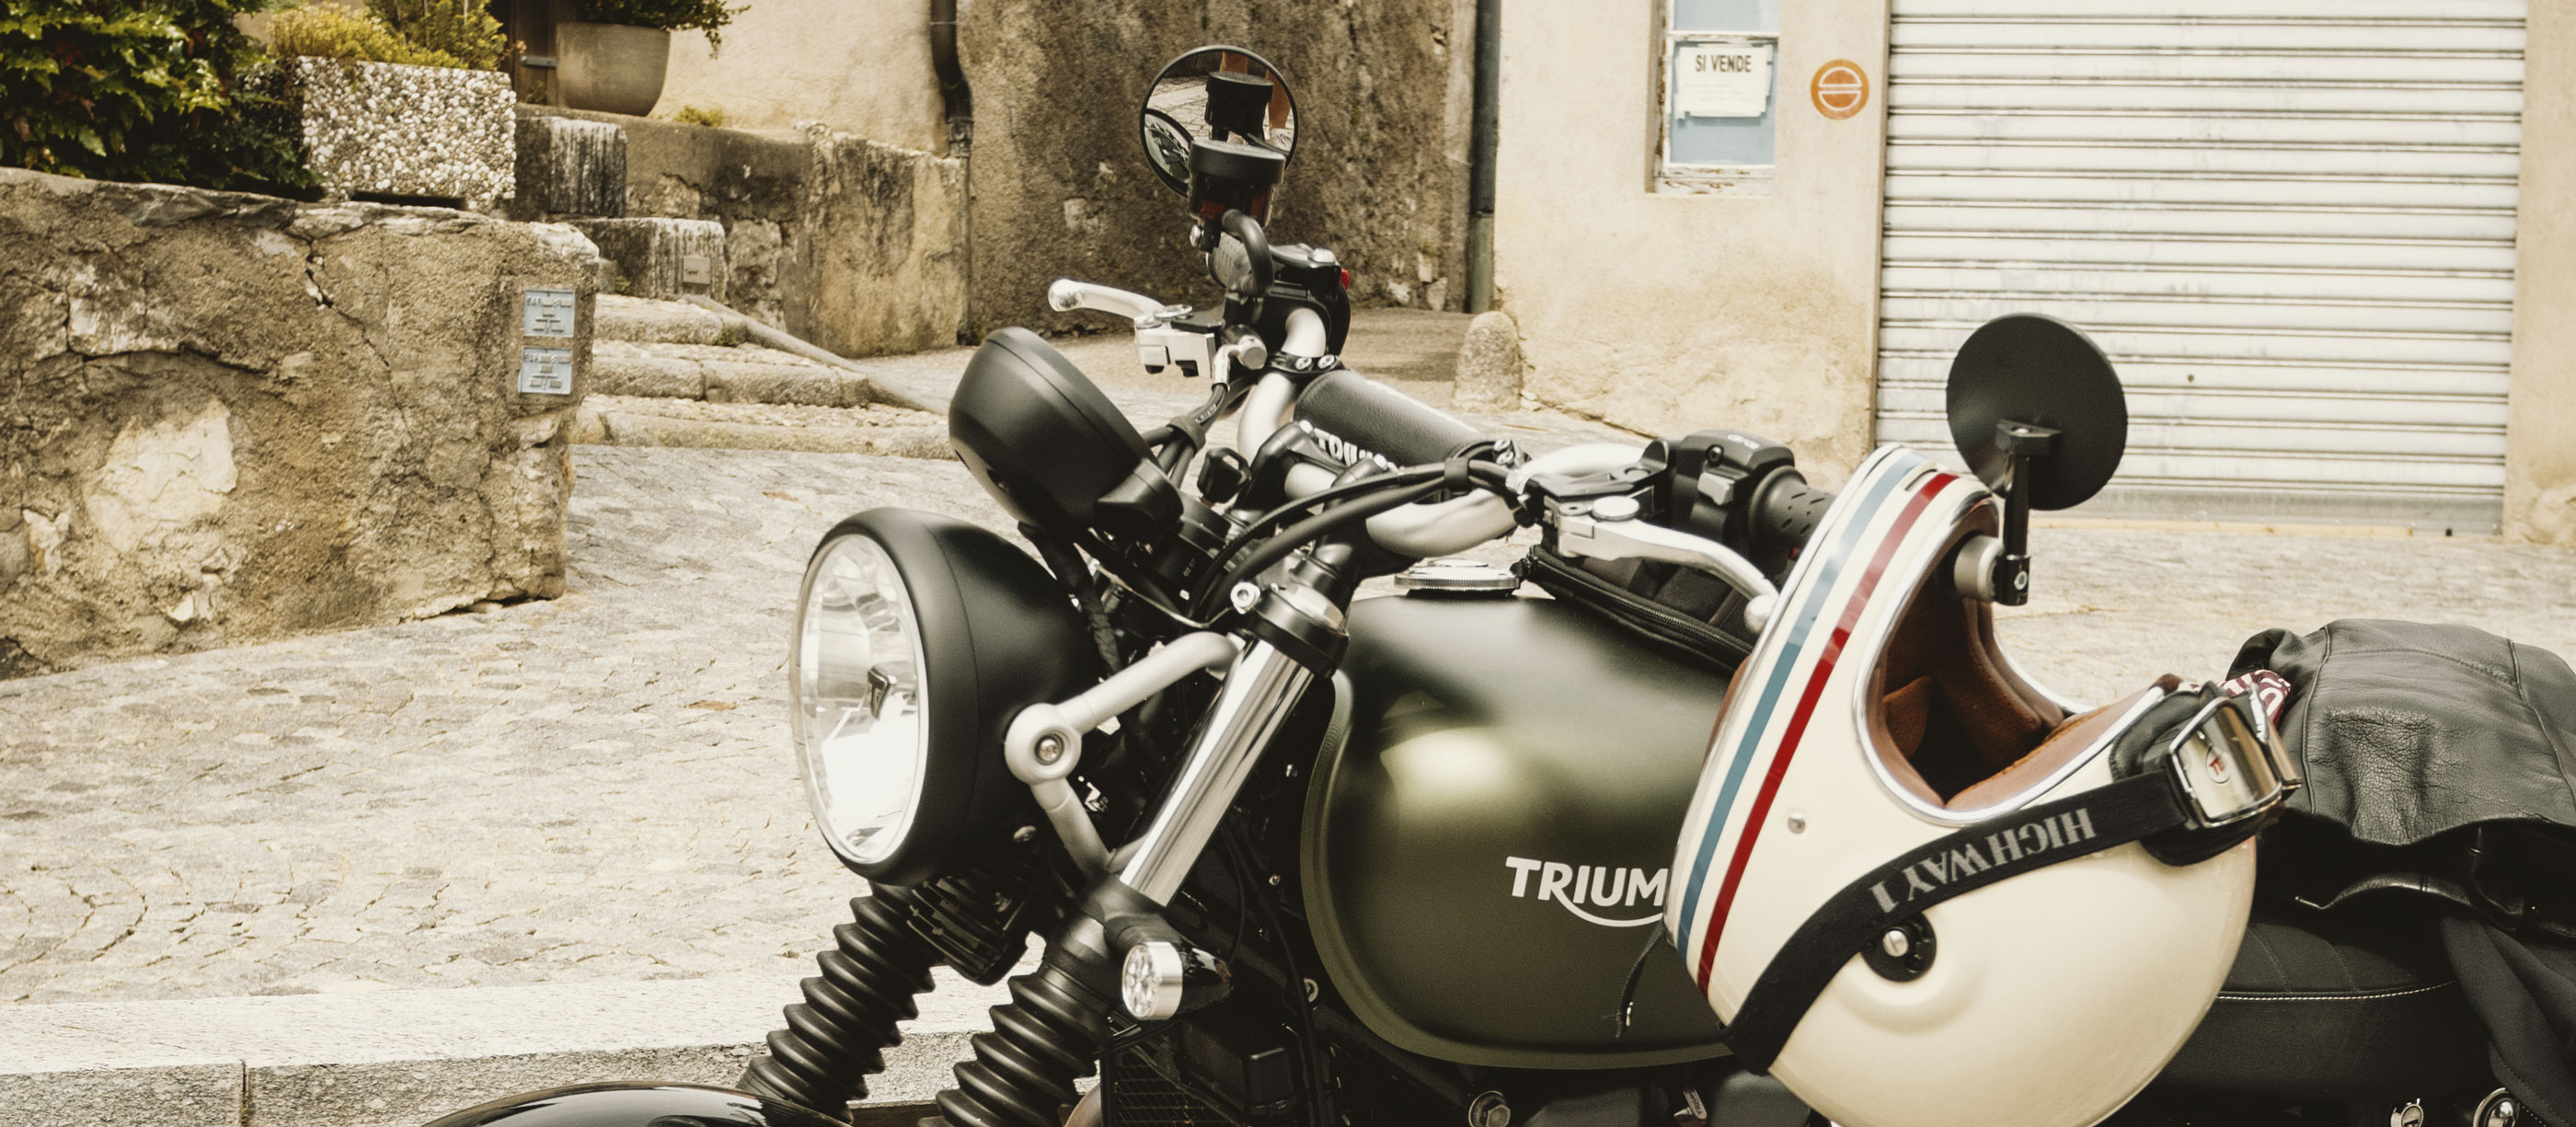 Tips for Motorcycle Trips Abroad